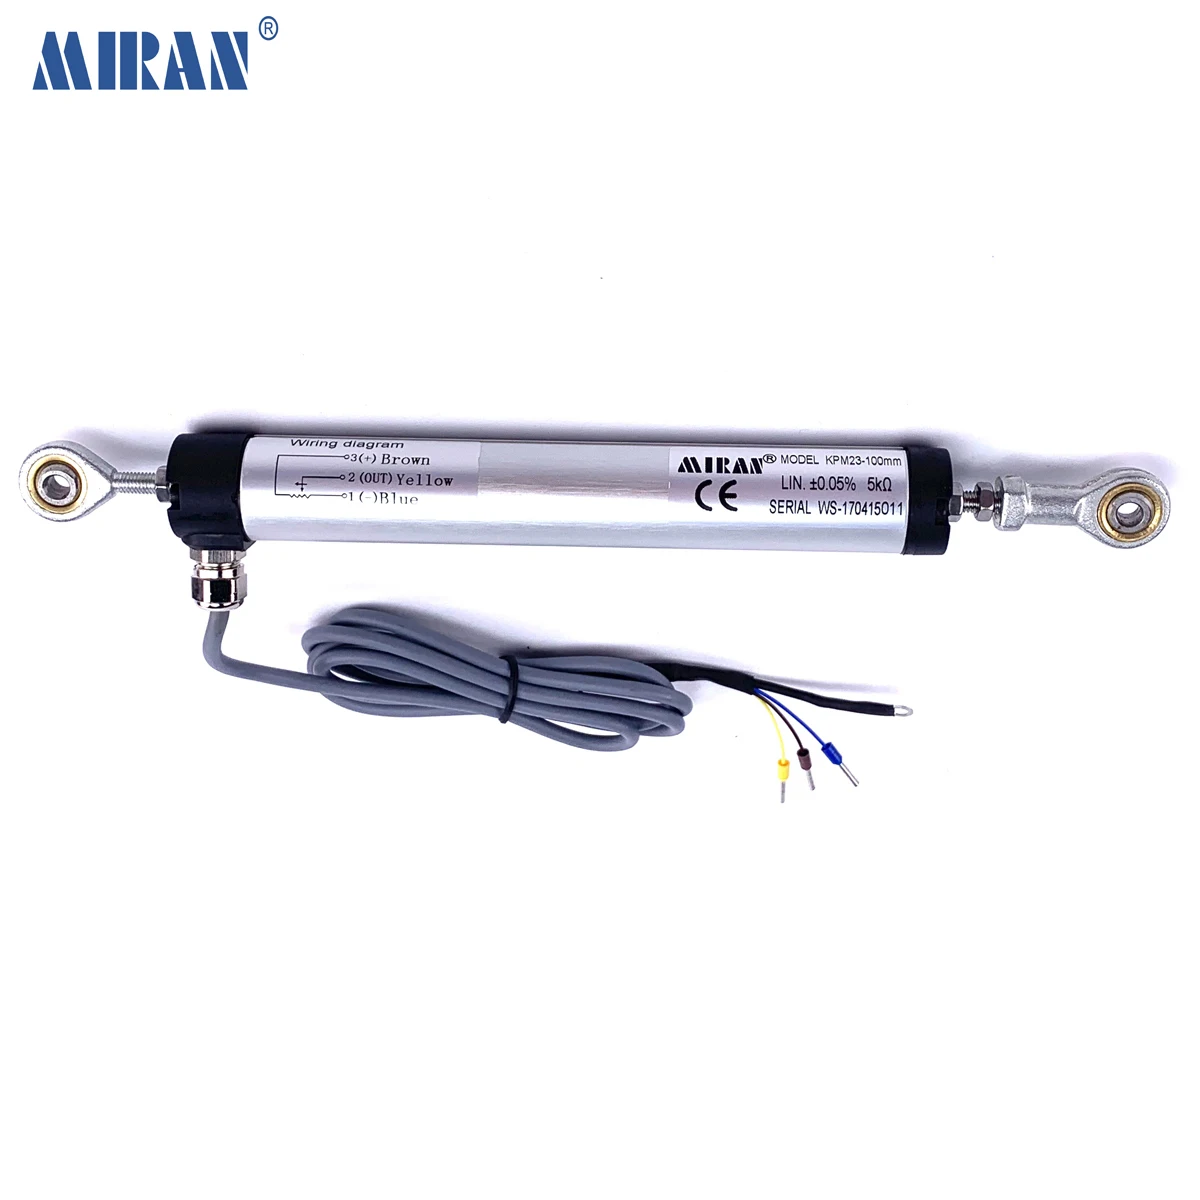 Miran Articulated Displacement Sensor with 2 Ball Joint KPM23 100mm-300mm Hot Sell Diameter 23mm Linear Position Transducer